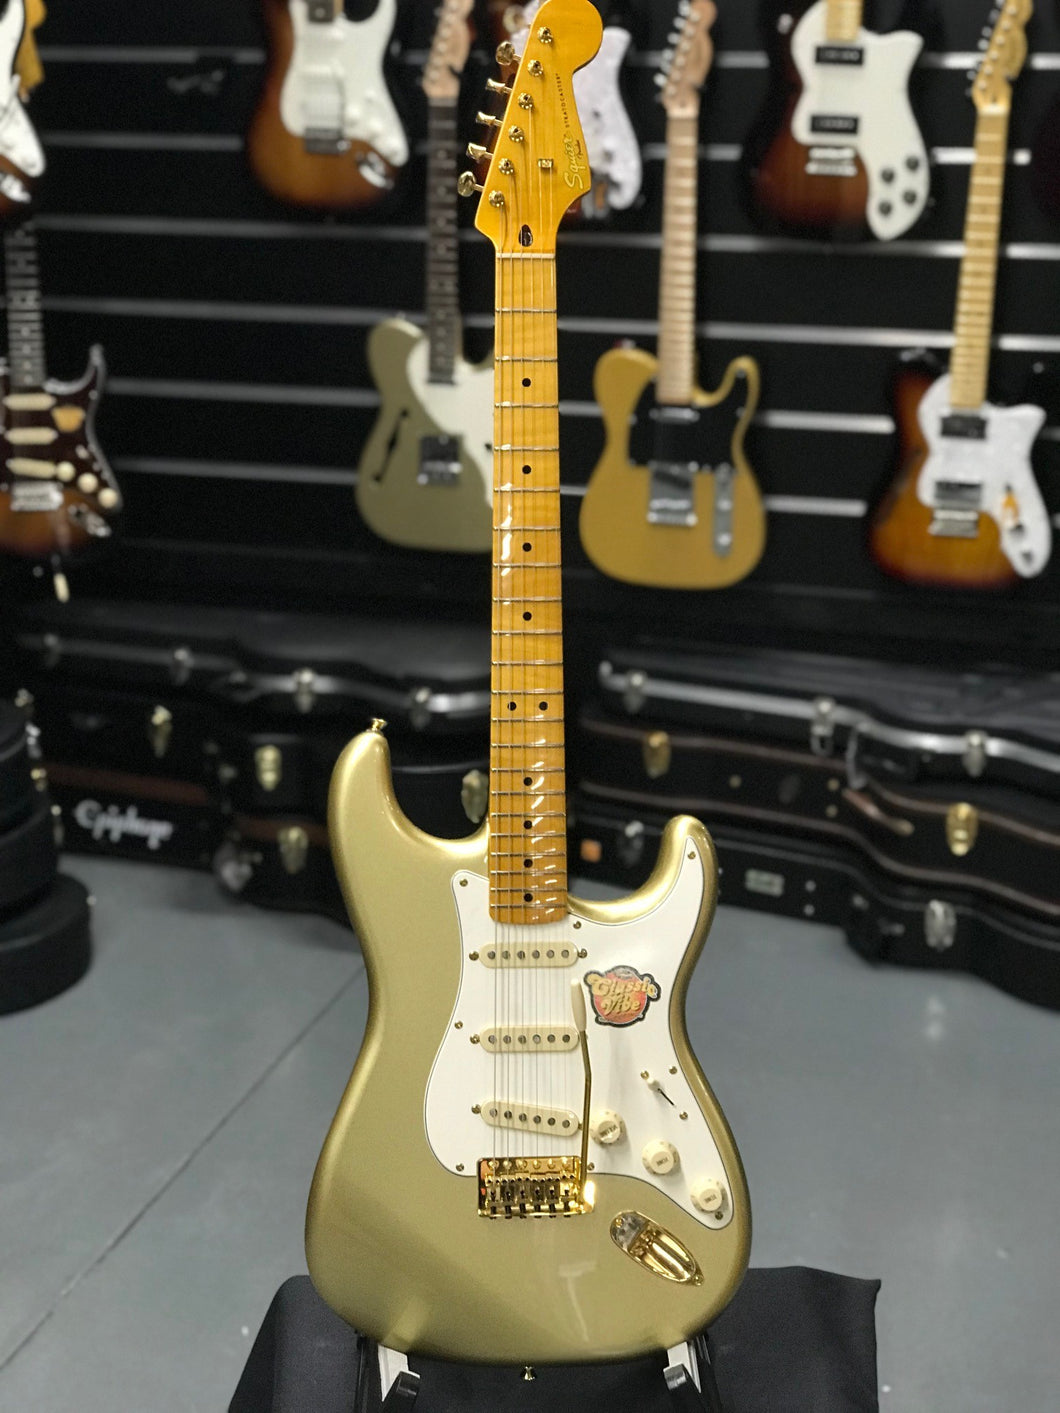 Squier Classic Vibe 60th Anniversary Stratocaster Gold (Pre-owned)